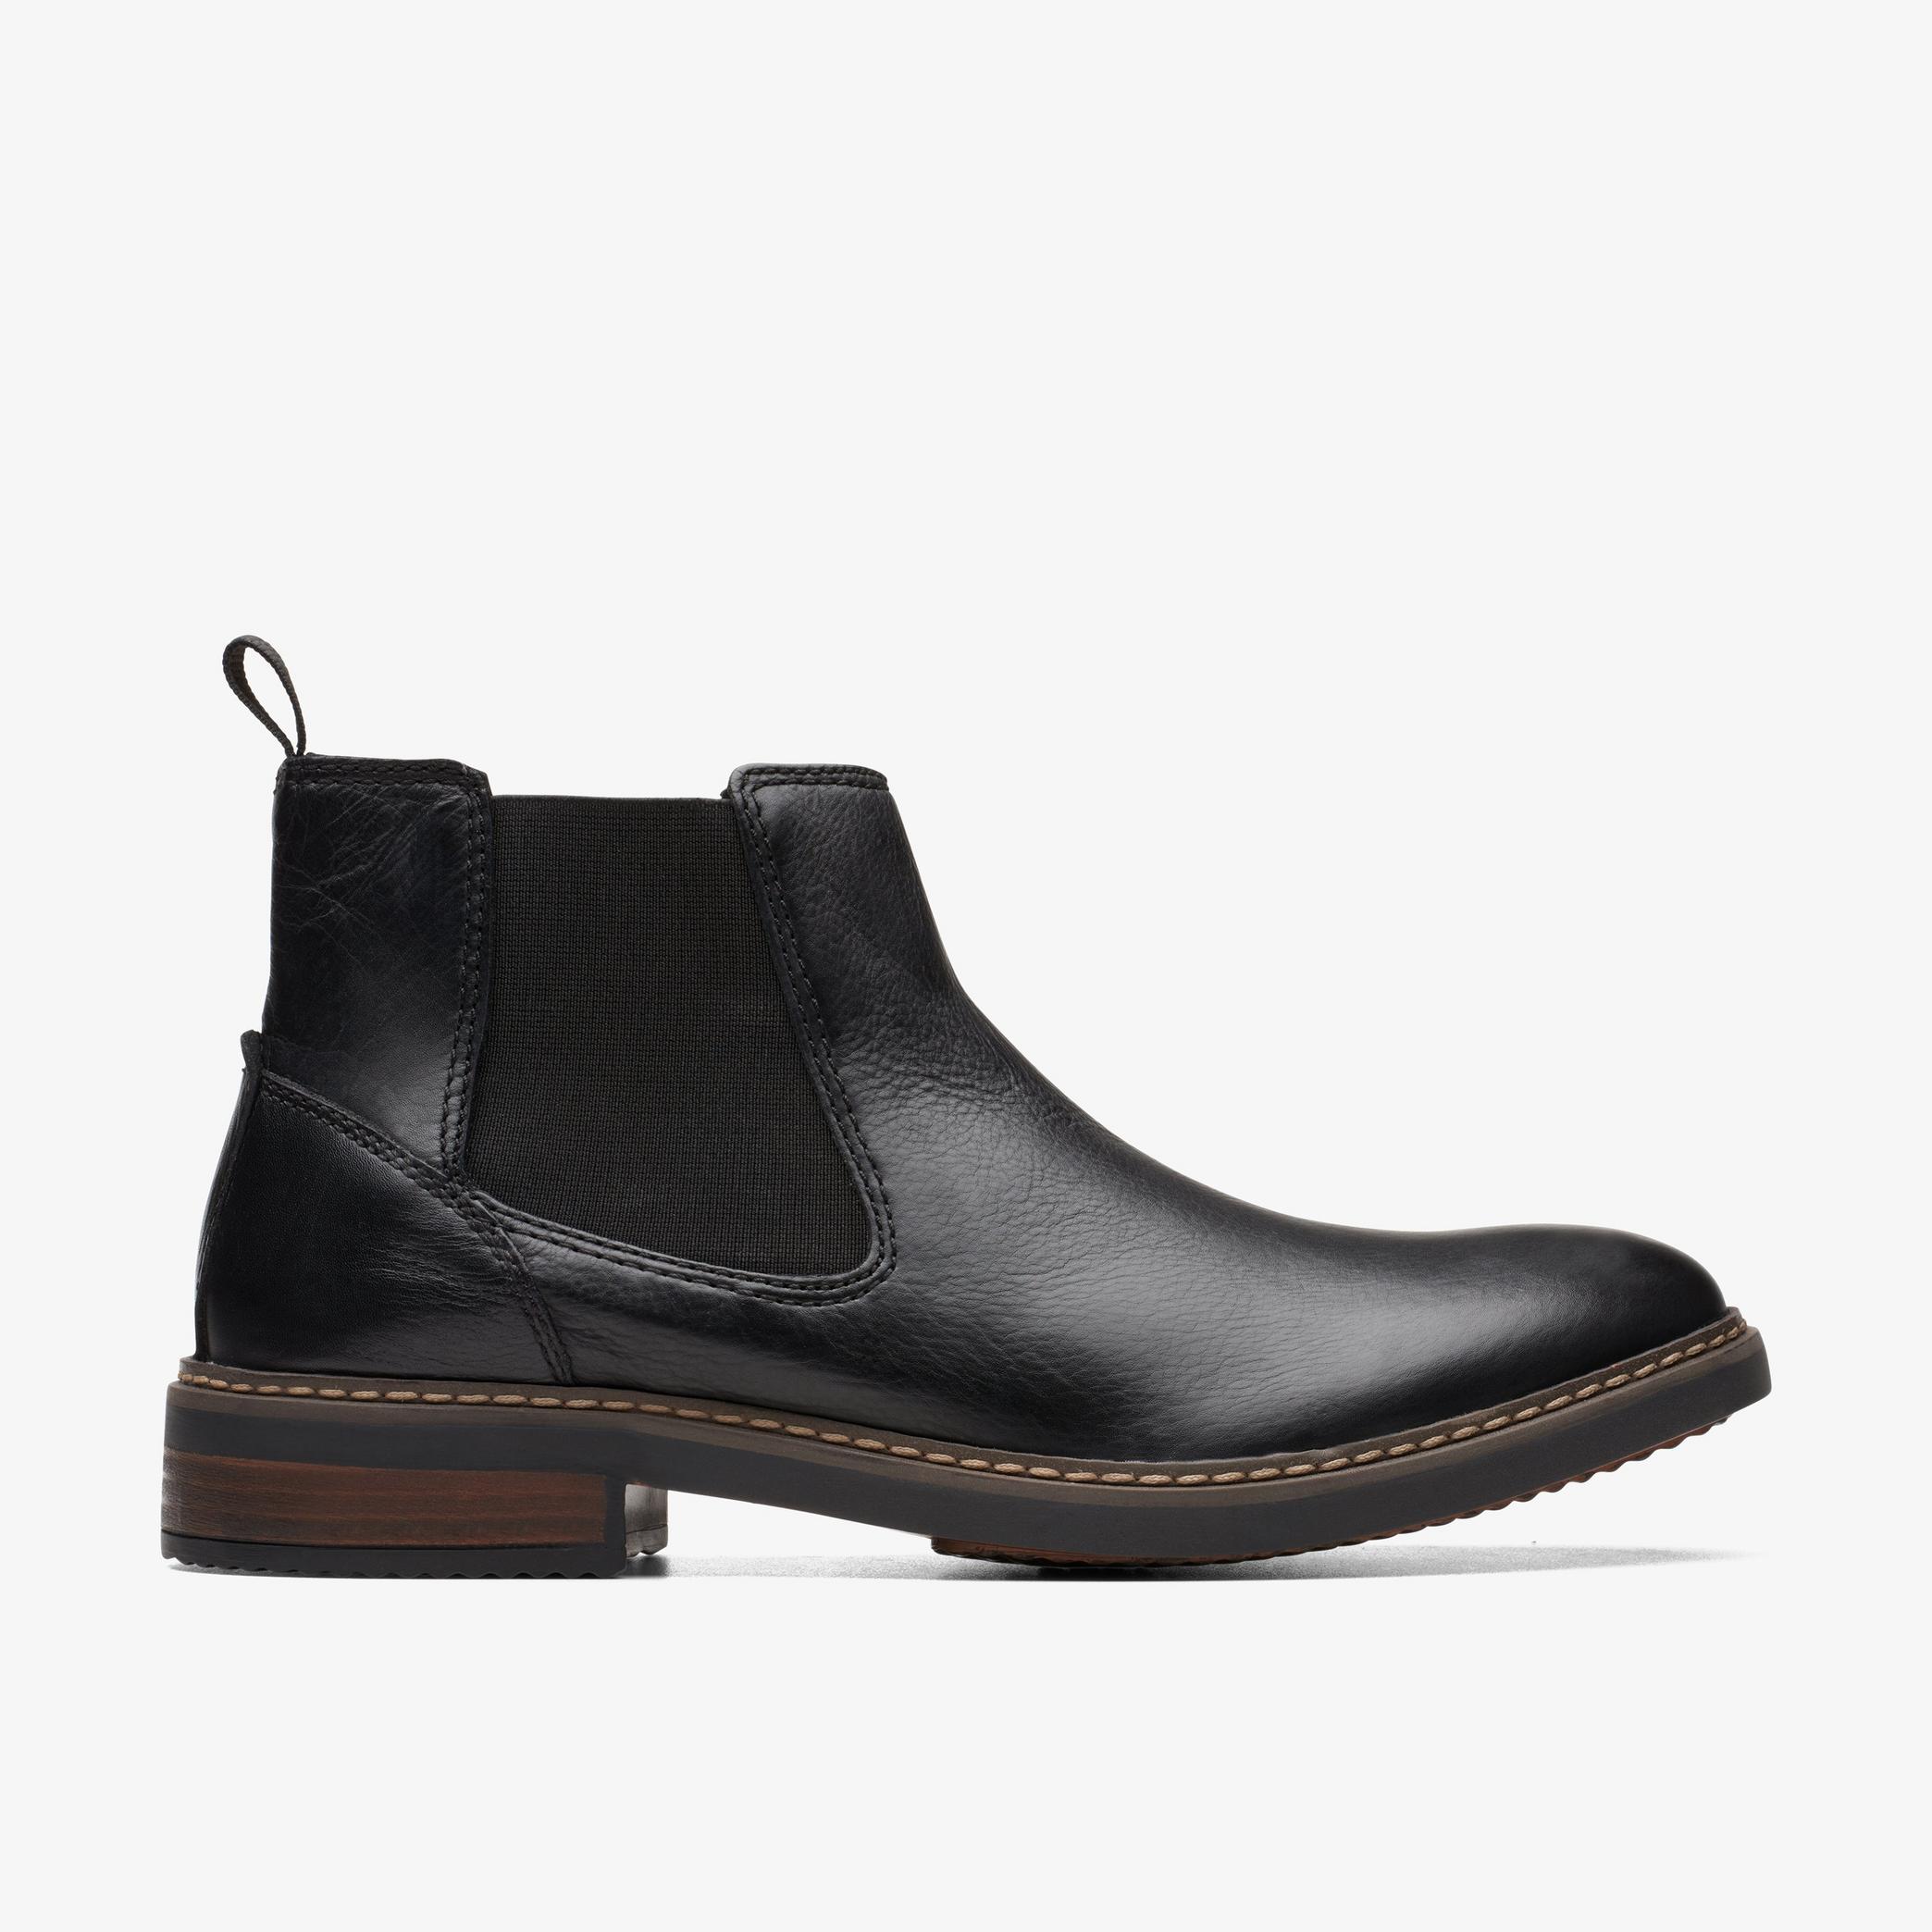 Blackford Top Black Leather Chelsea Boots, view 1 of 6